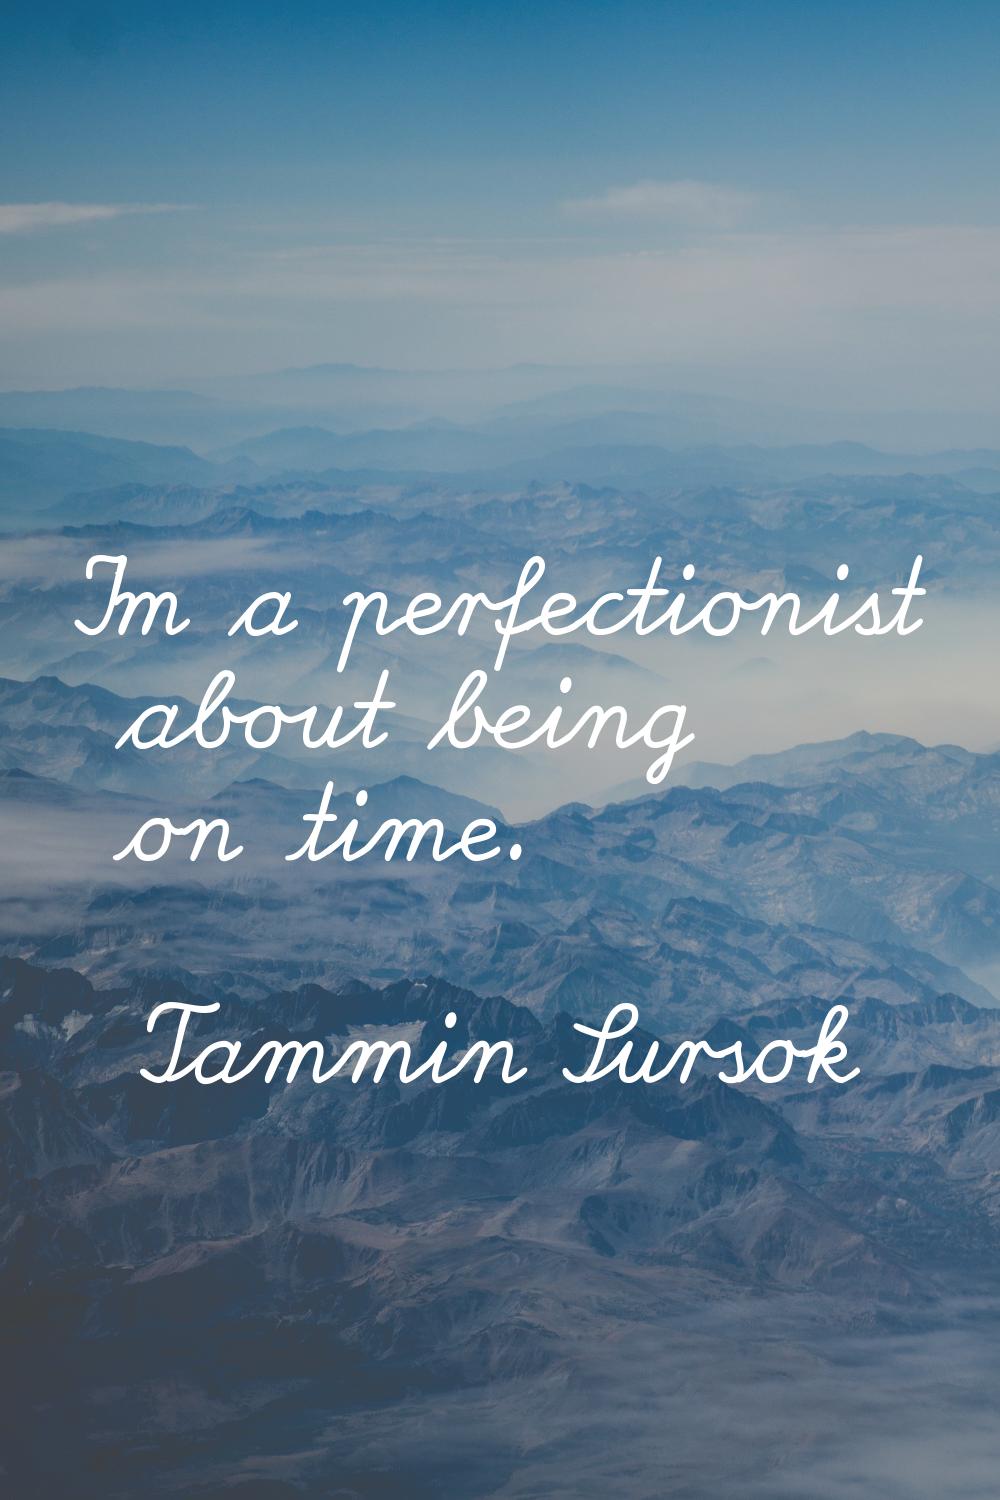 I'm a perfectionist about being on time.